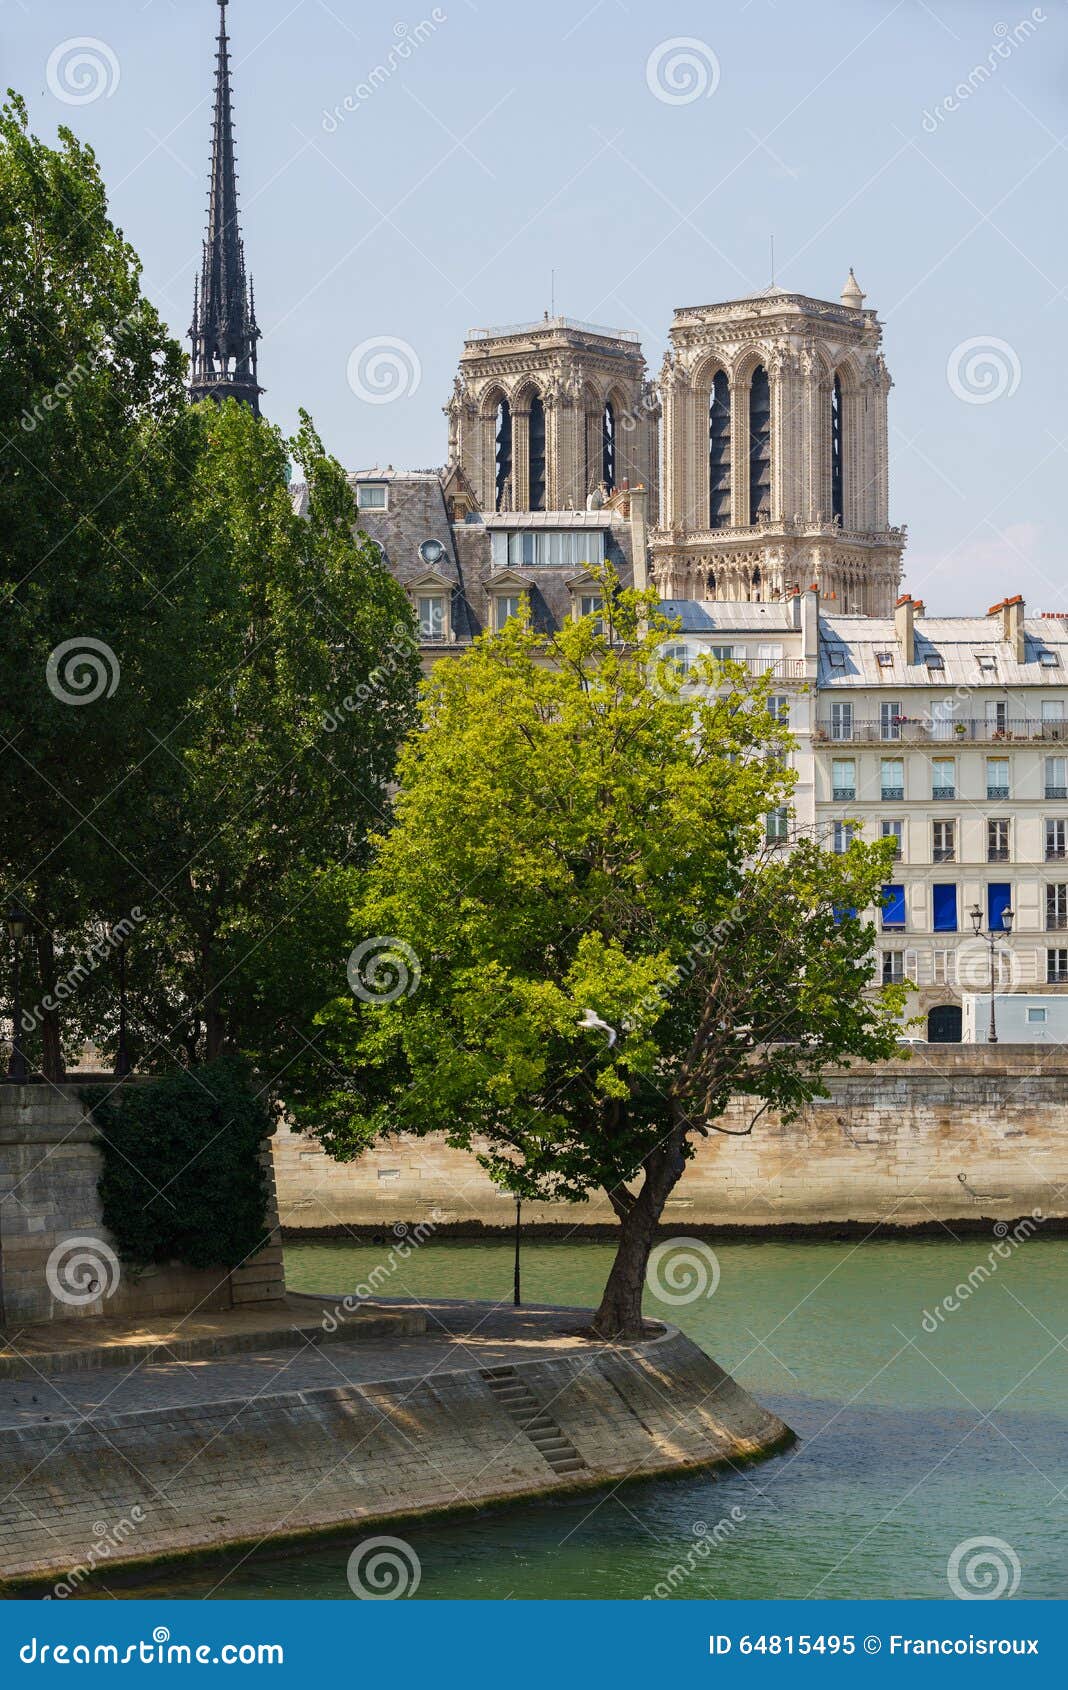 Notre Dame De Paris Cathedral Towers, Seine River In Summer. France Stock Image - Image of ...